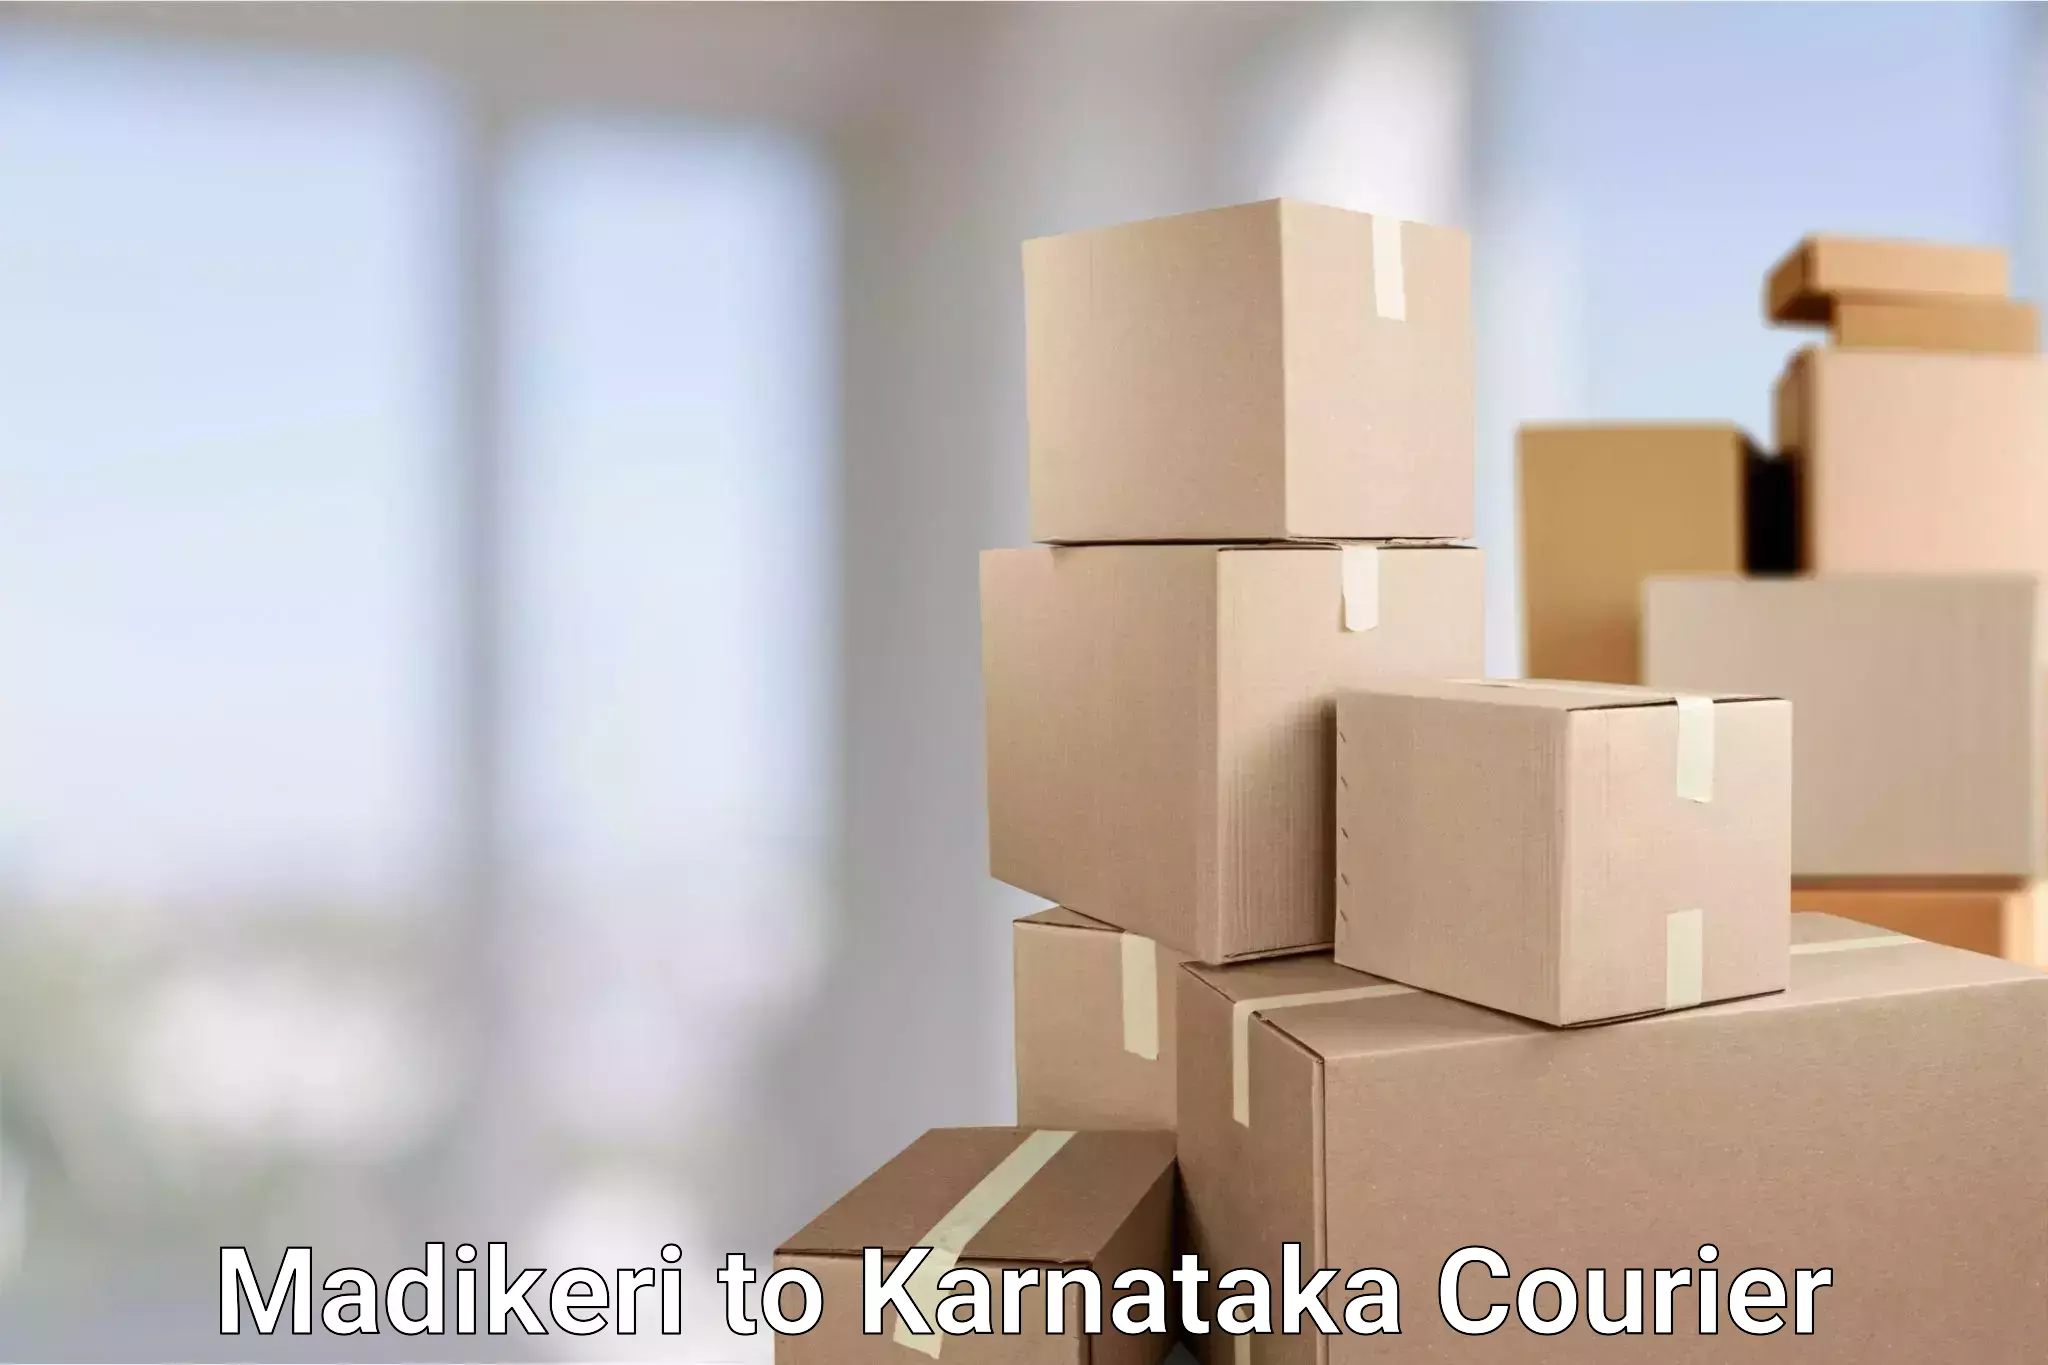 24/7 courier service Madikeri to Chikmagalur